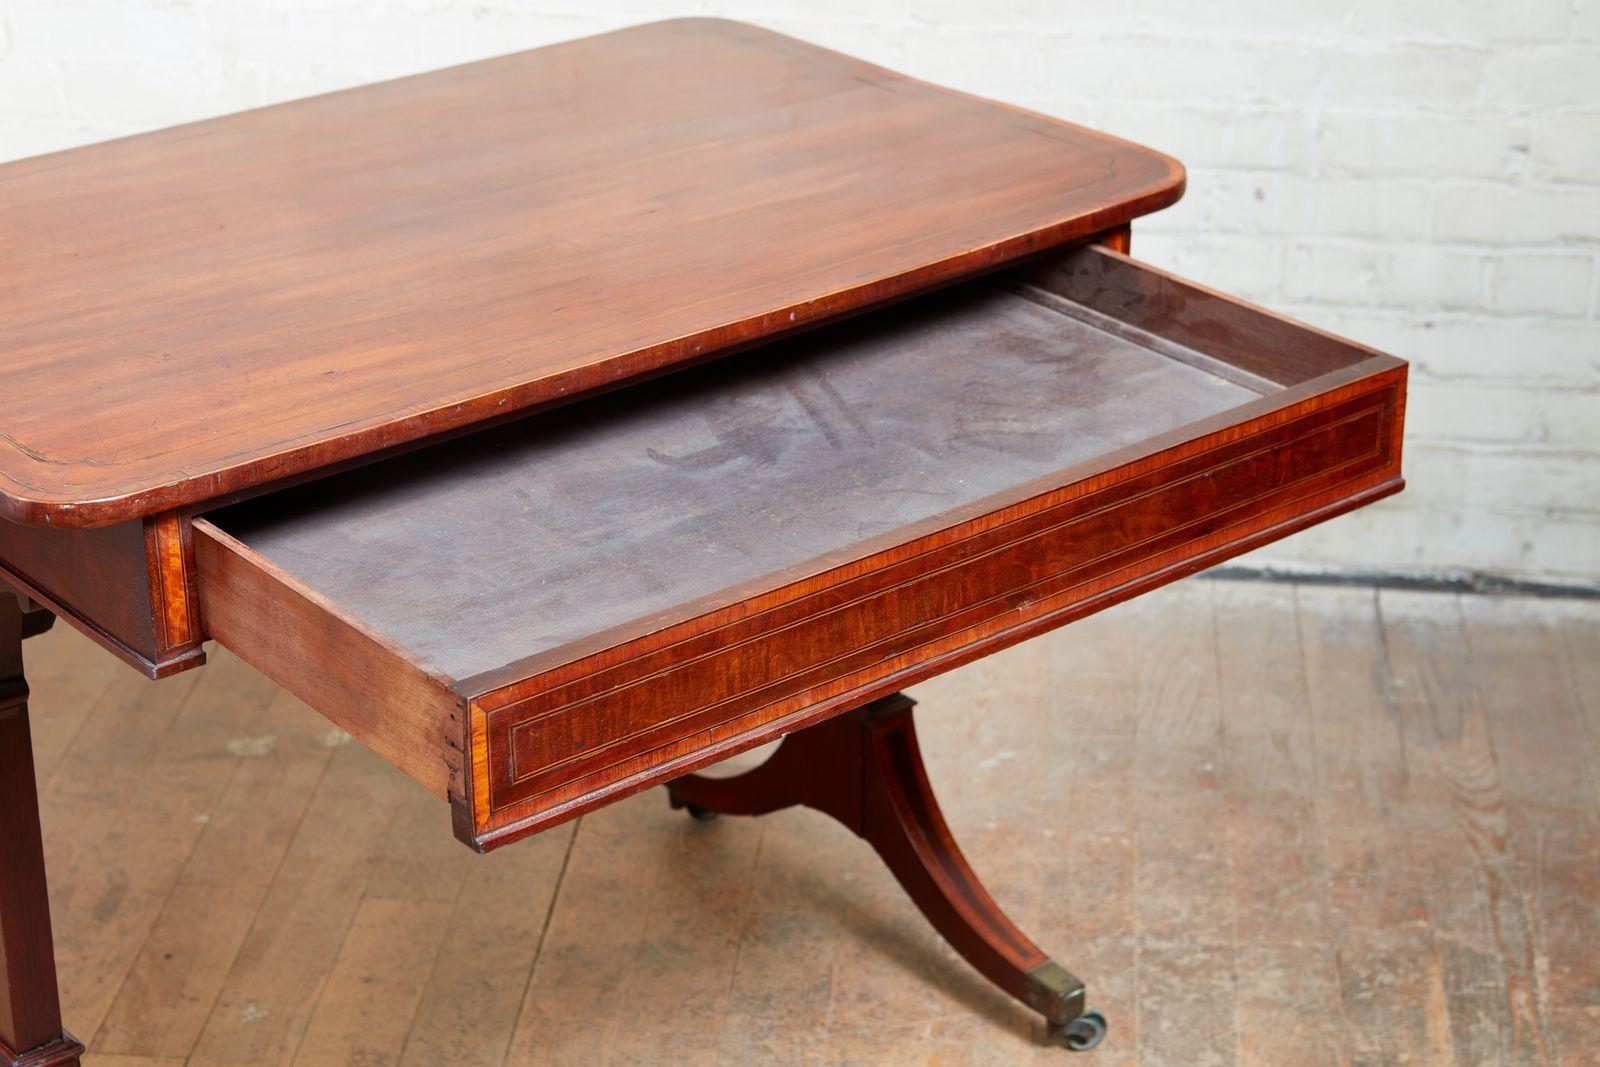 Good Georgian mahogany and satinwood cross banded writing table, the top having rounded corners with string inlay and satinwood banding, over single drawer similarly treated and standing on trestle legs with inlaid down swept legs ending in boxed